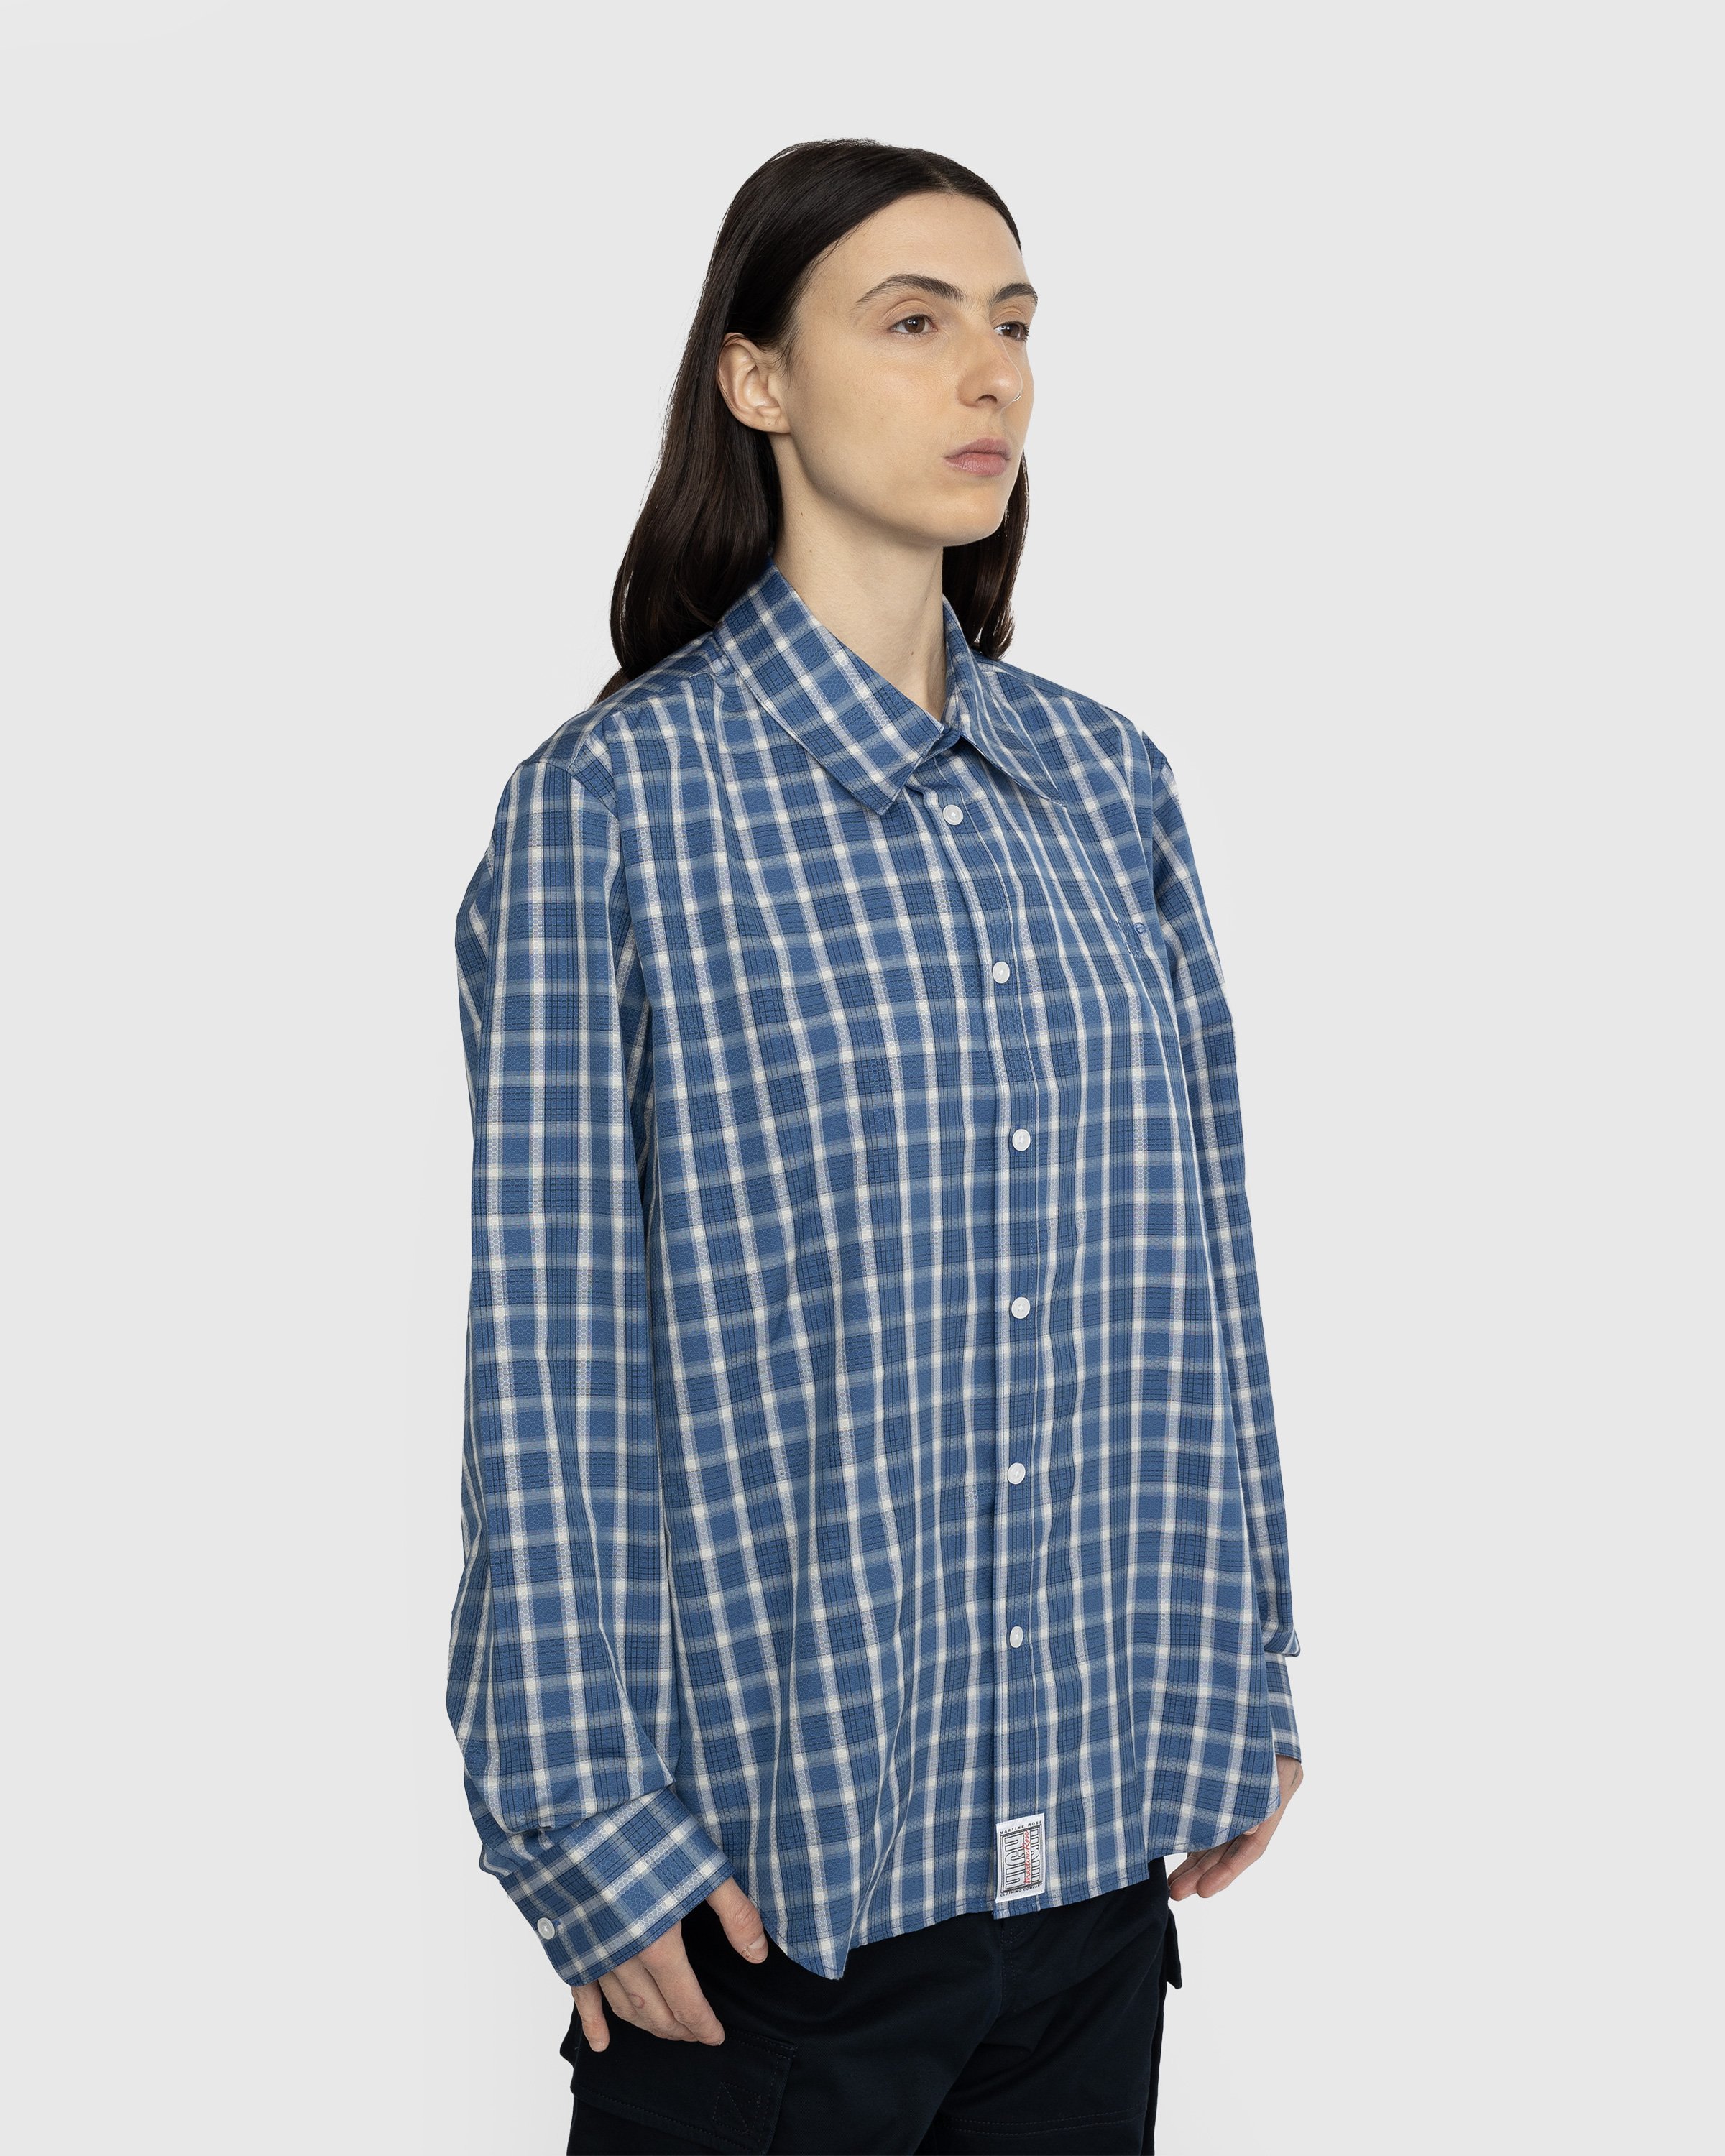 Martine Rose - Classic Check Button-Down Shirt Blue - Clothing - Blue - Image 4